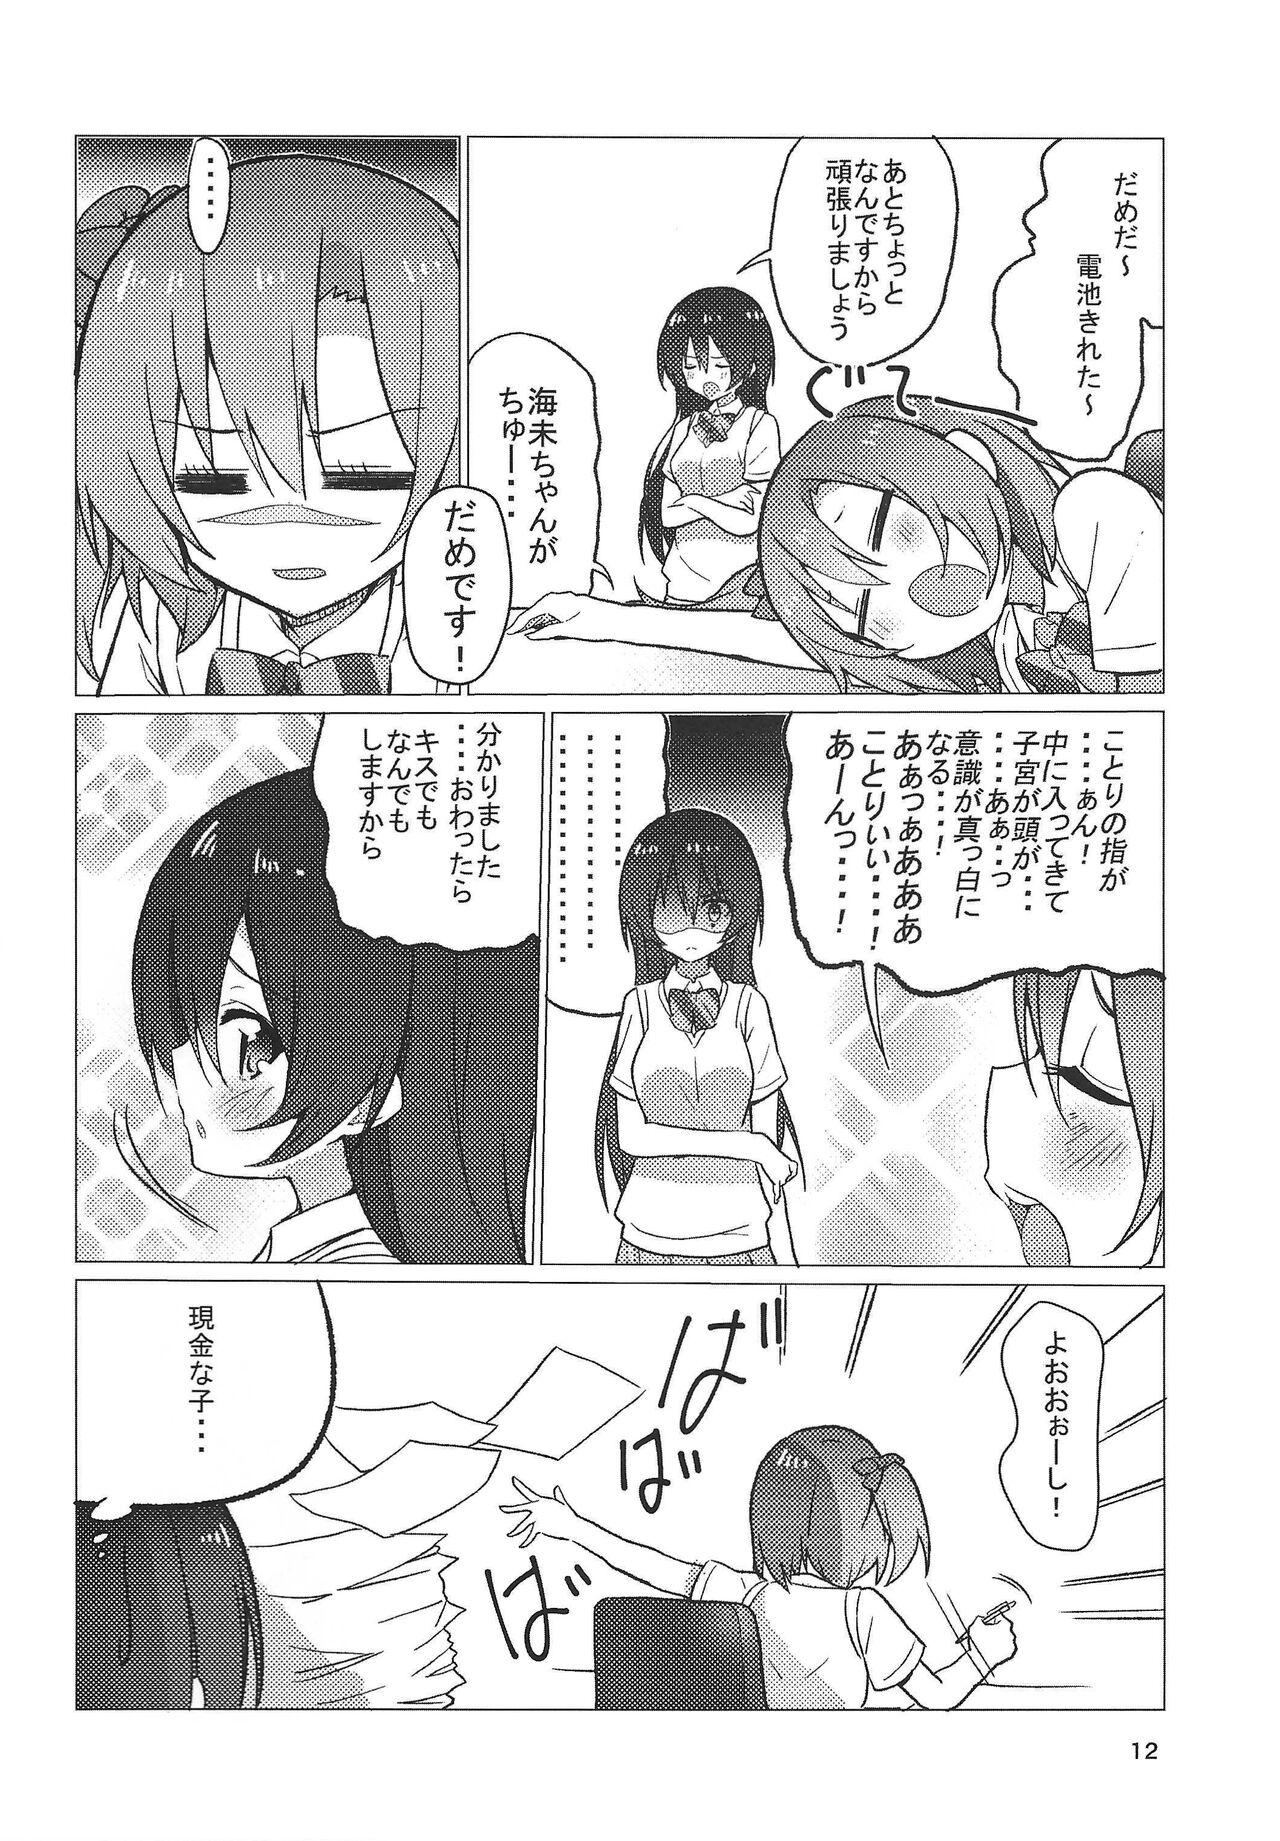 Insertion 海未ちゃん笑顔で1,2,Jump! - Love live Students - Page 11